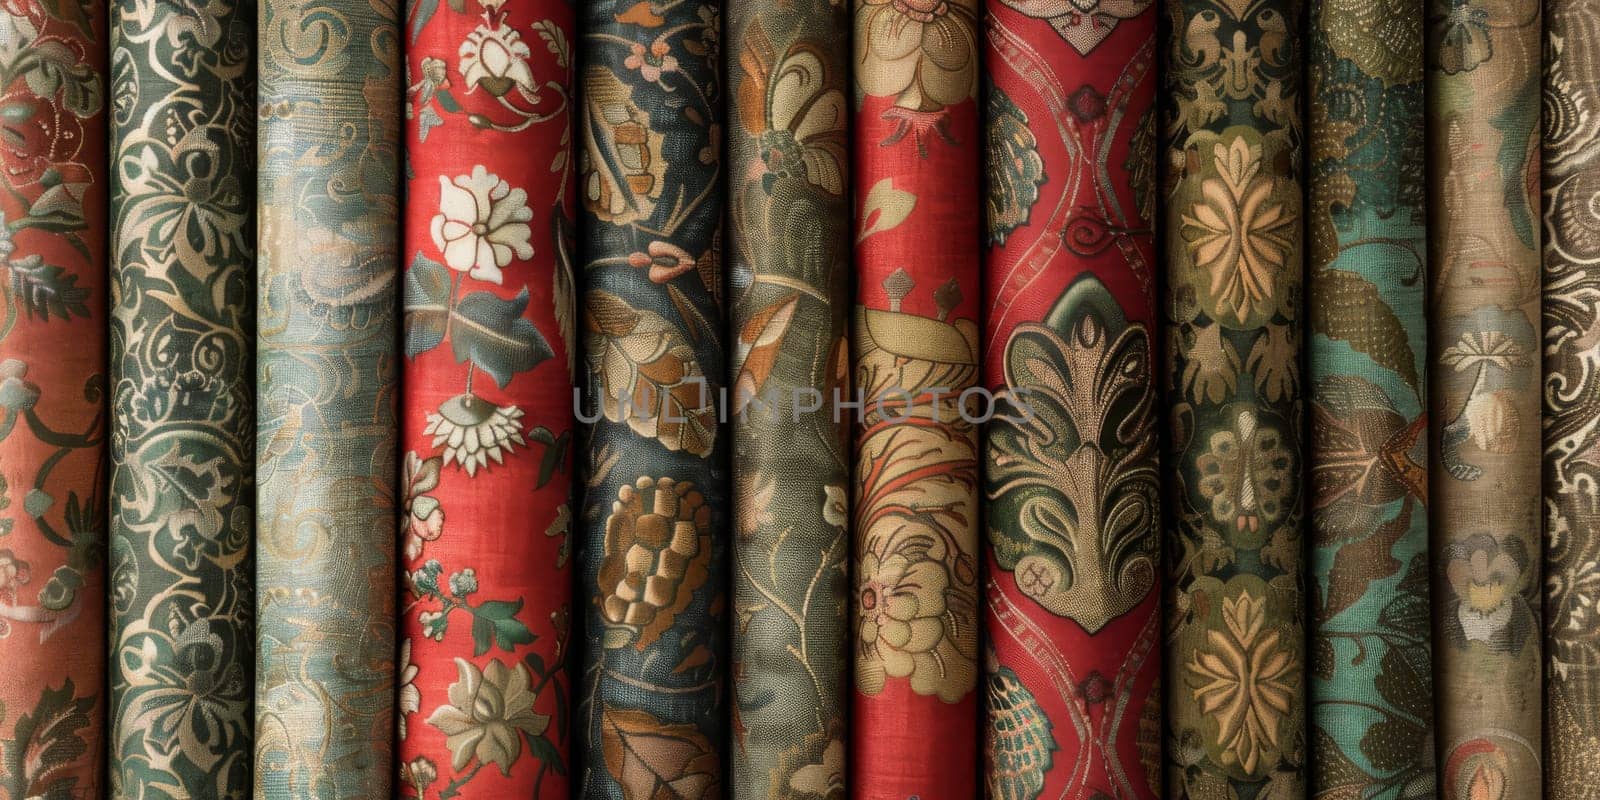 Upholstery fabrics, or decorative tiles, providing inspiration for an interior design and home